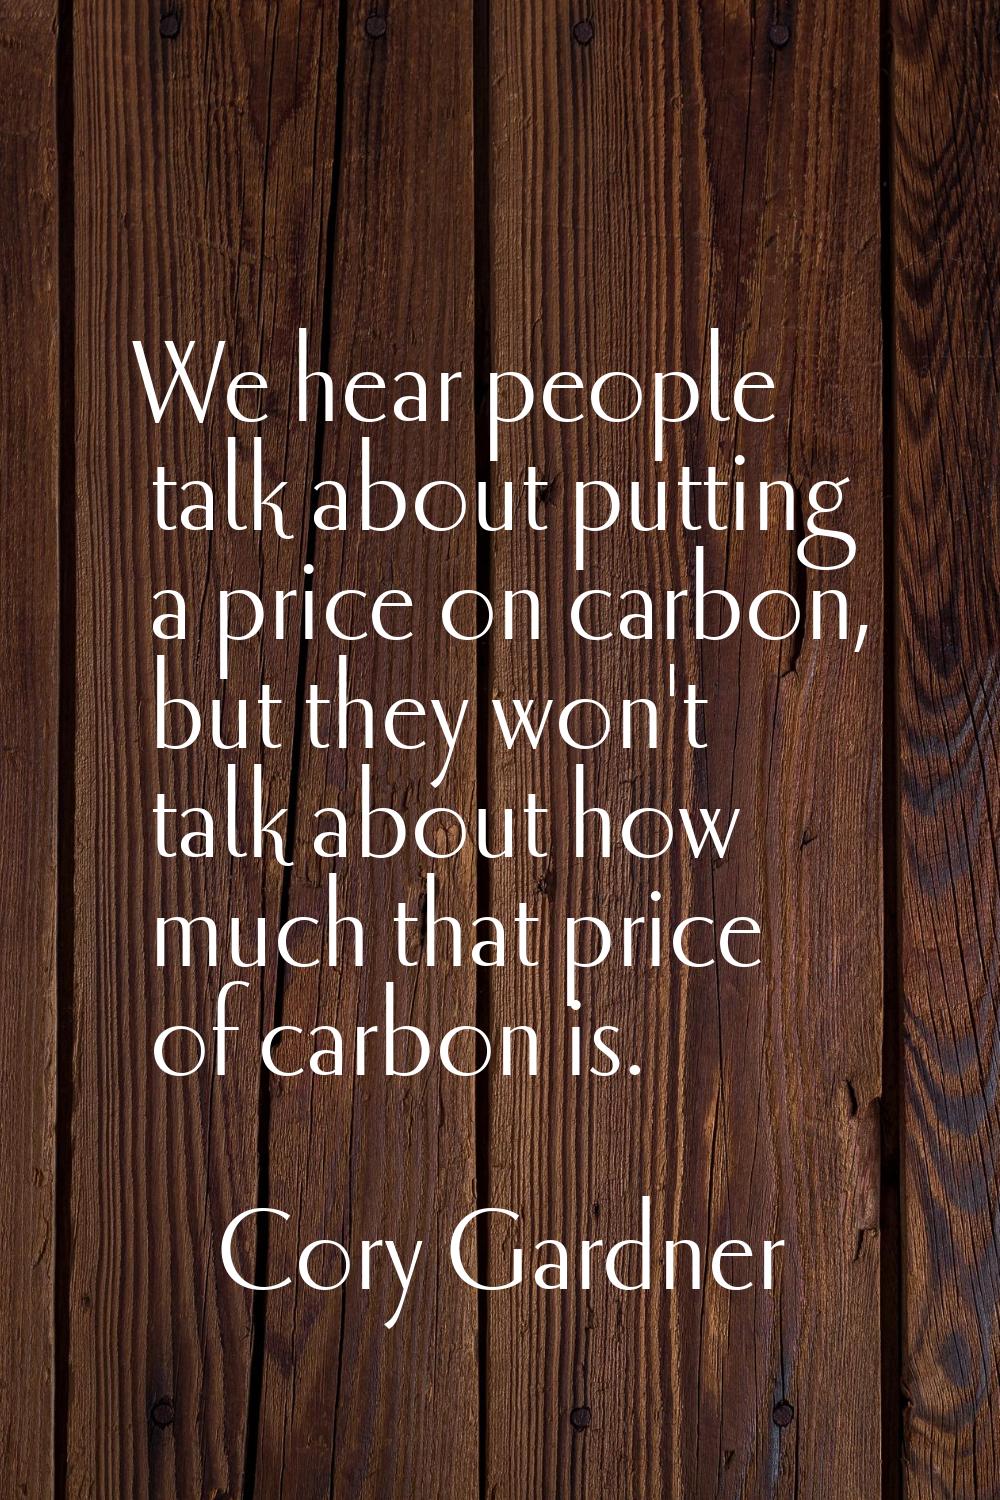 We hear people talk about putting a price on carbon, but they won't talk about how much that price 